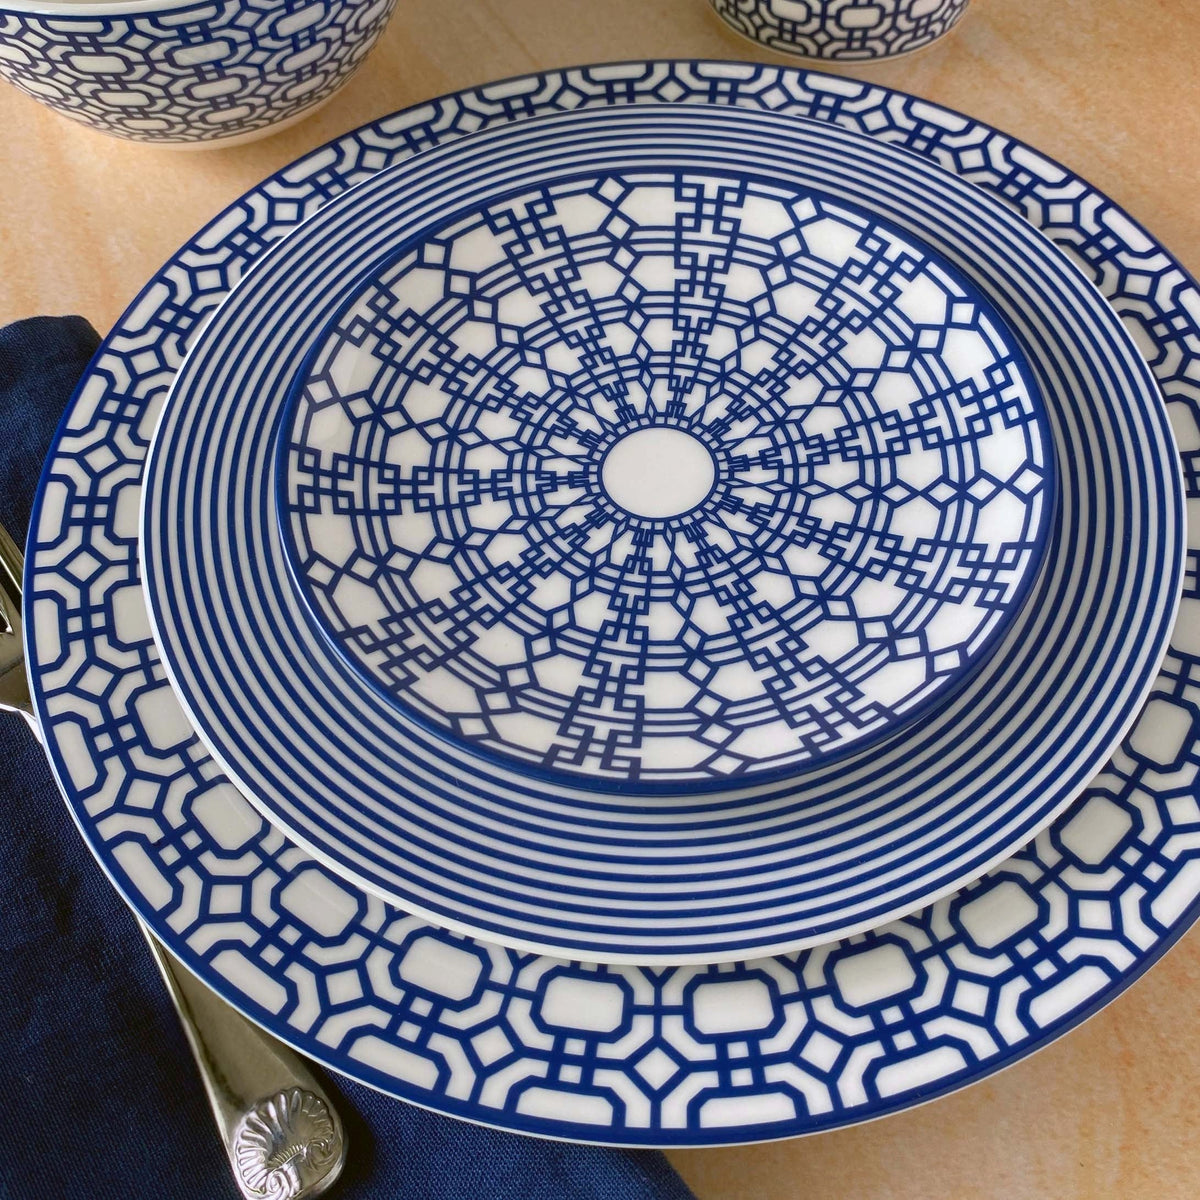 A set of Newport Canapé Plates by Caskata Artisanal Home, lattice-patterned blue and white plates on a table.